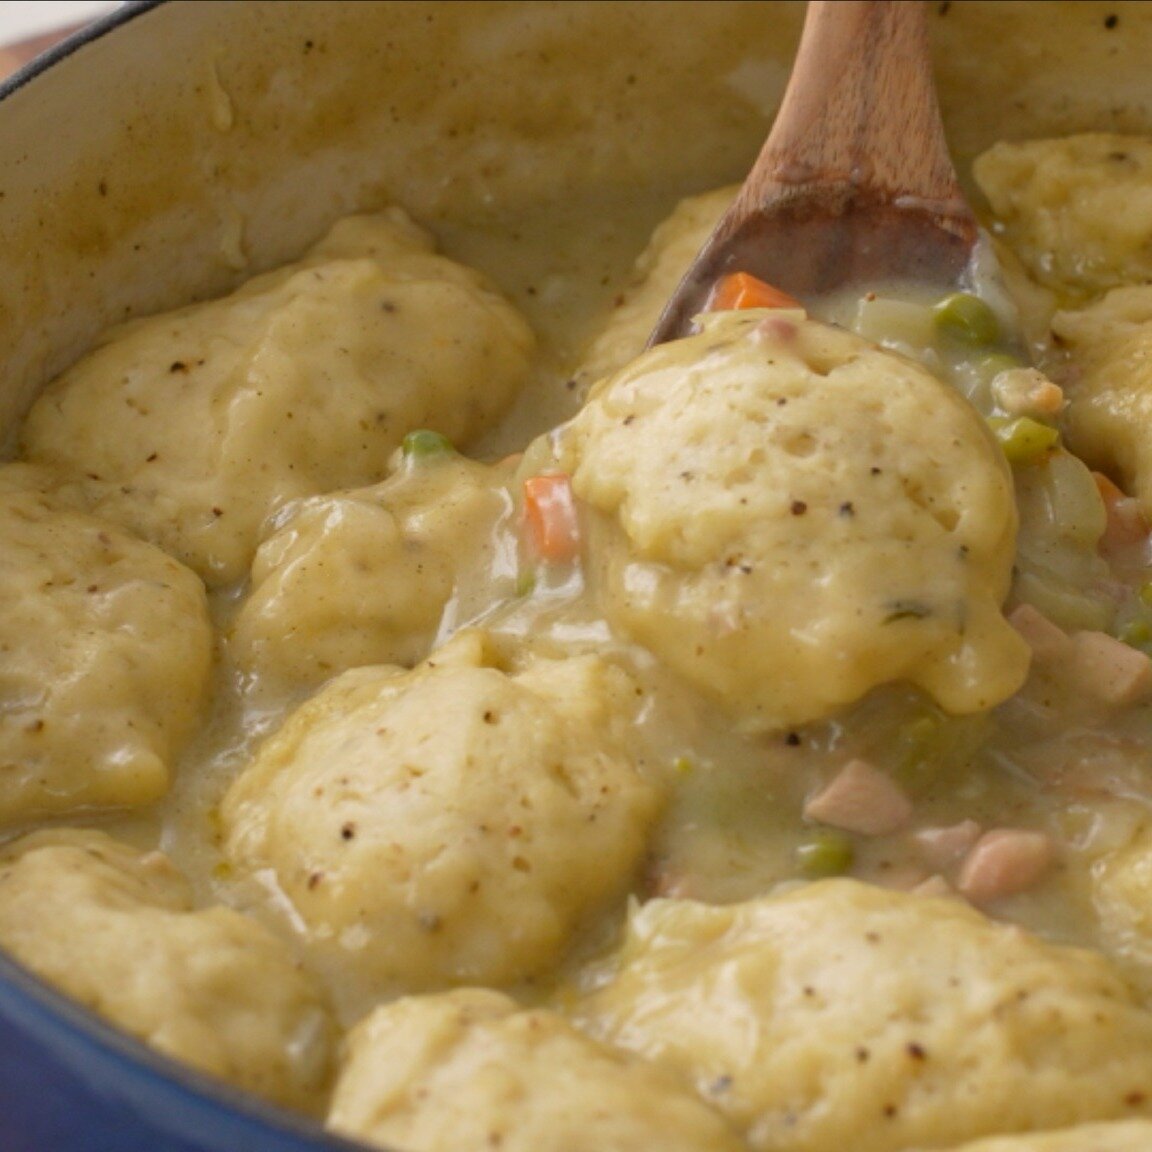 This chicken and dumplings recipe is just a hearty, unapologetically great bowl of food that warms the soul. The steamed biscuit dumplings are light and fluffy and float in an herbal chickeny gravy that's the perfect balance between thick and thin. M